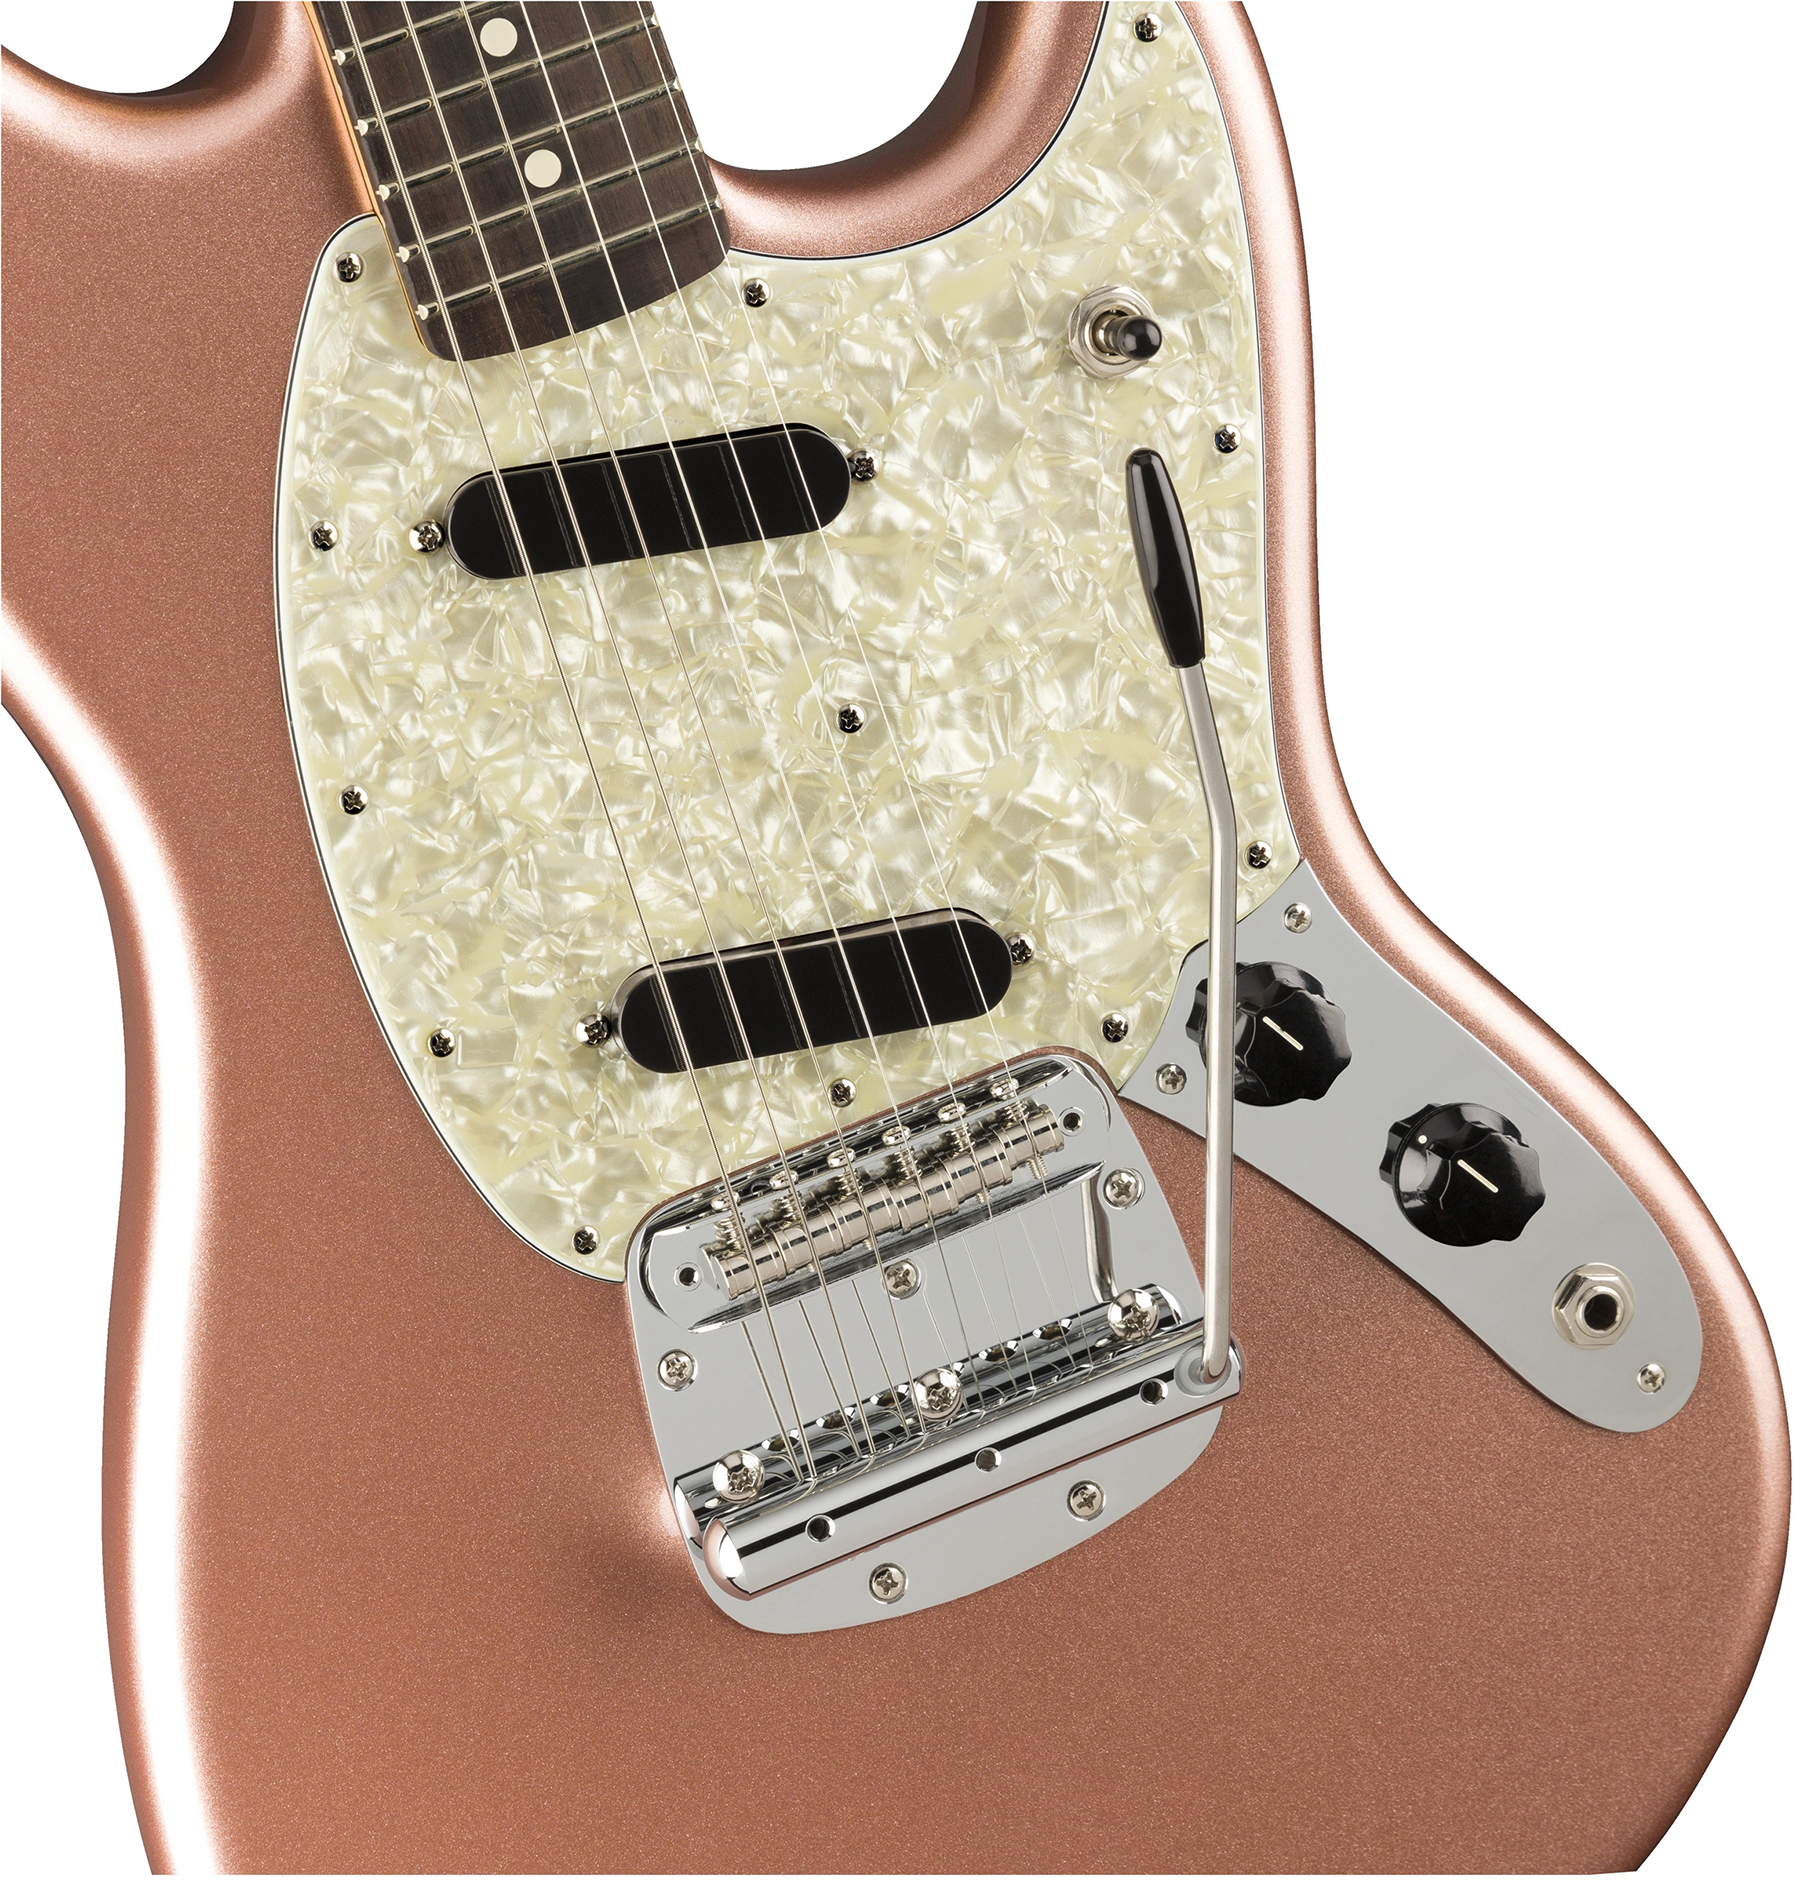 Fender Mustang American Performer Usa Ss Rw - Penny - Double cut electric guitar - Variation 2